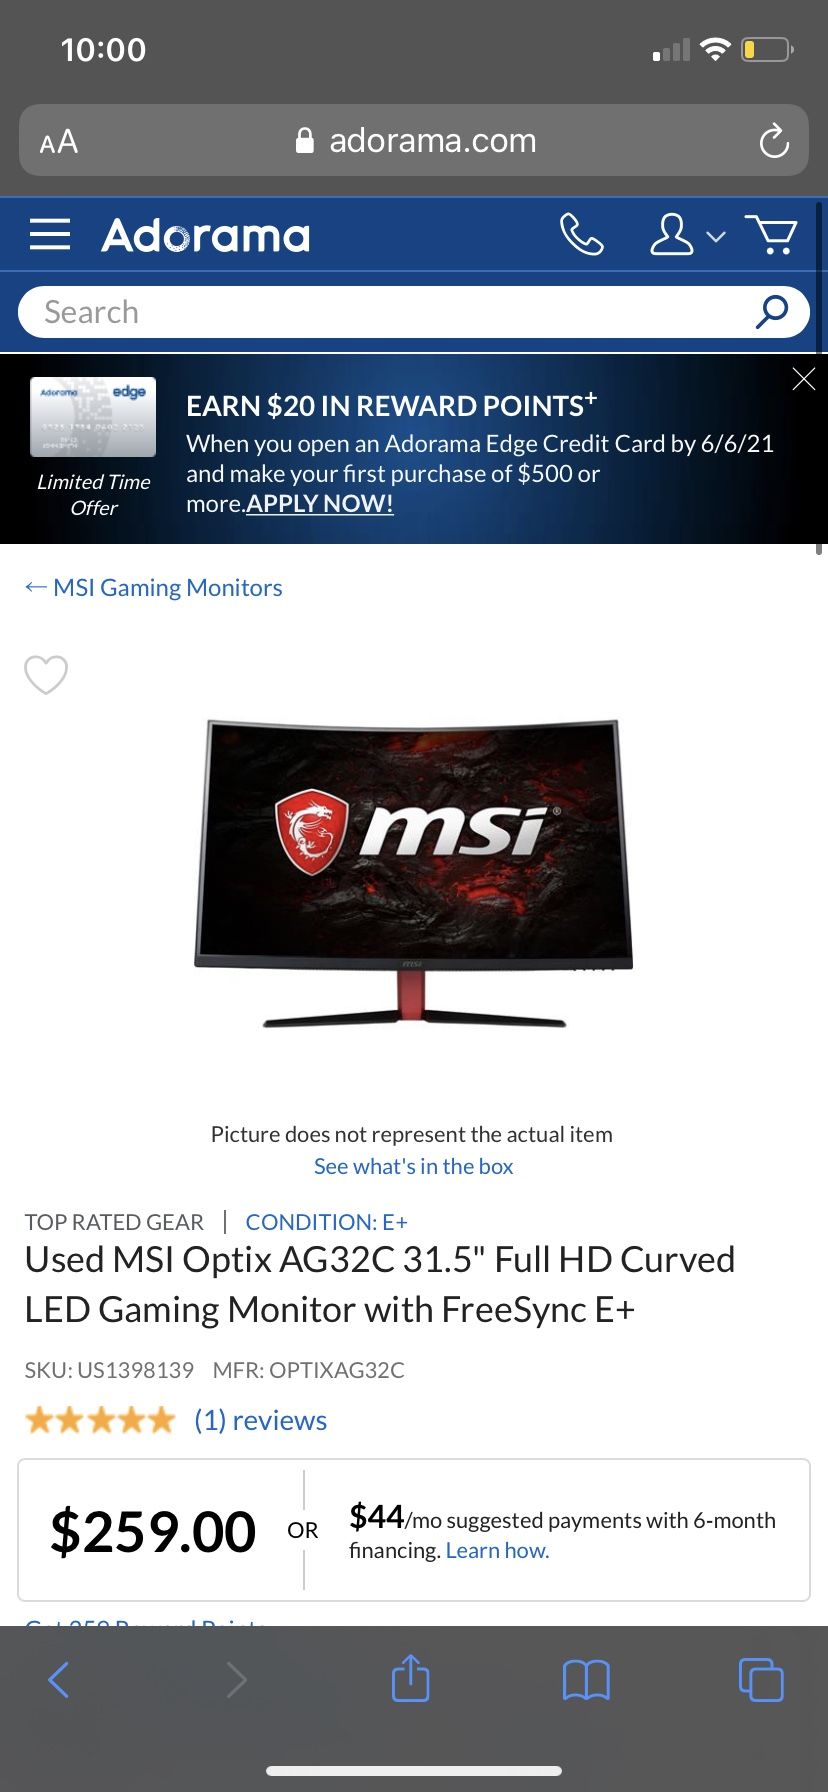 Msi 32 Inch Curved Display